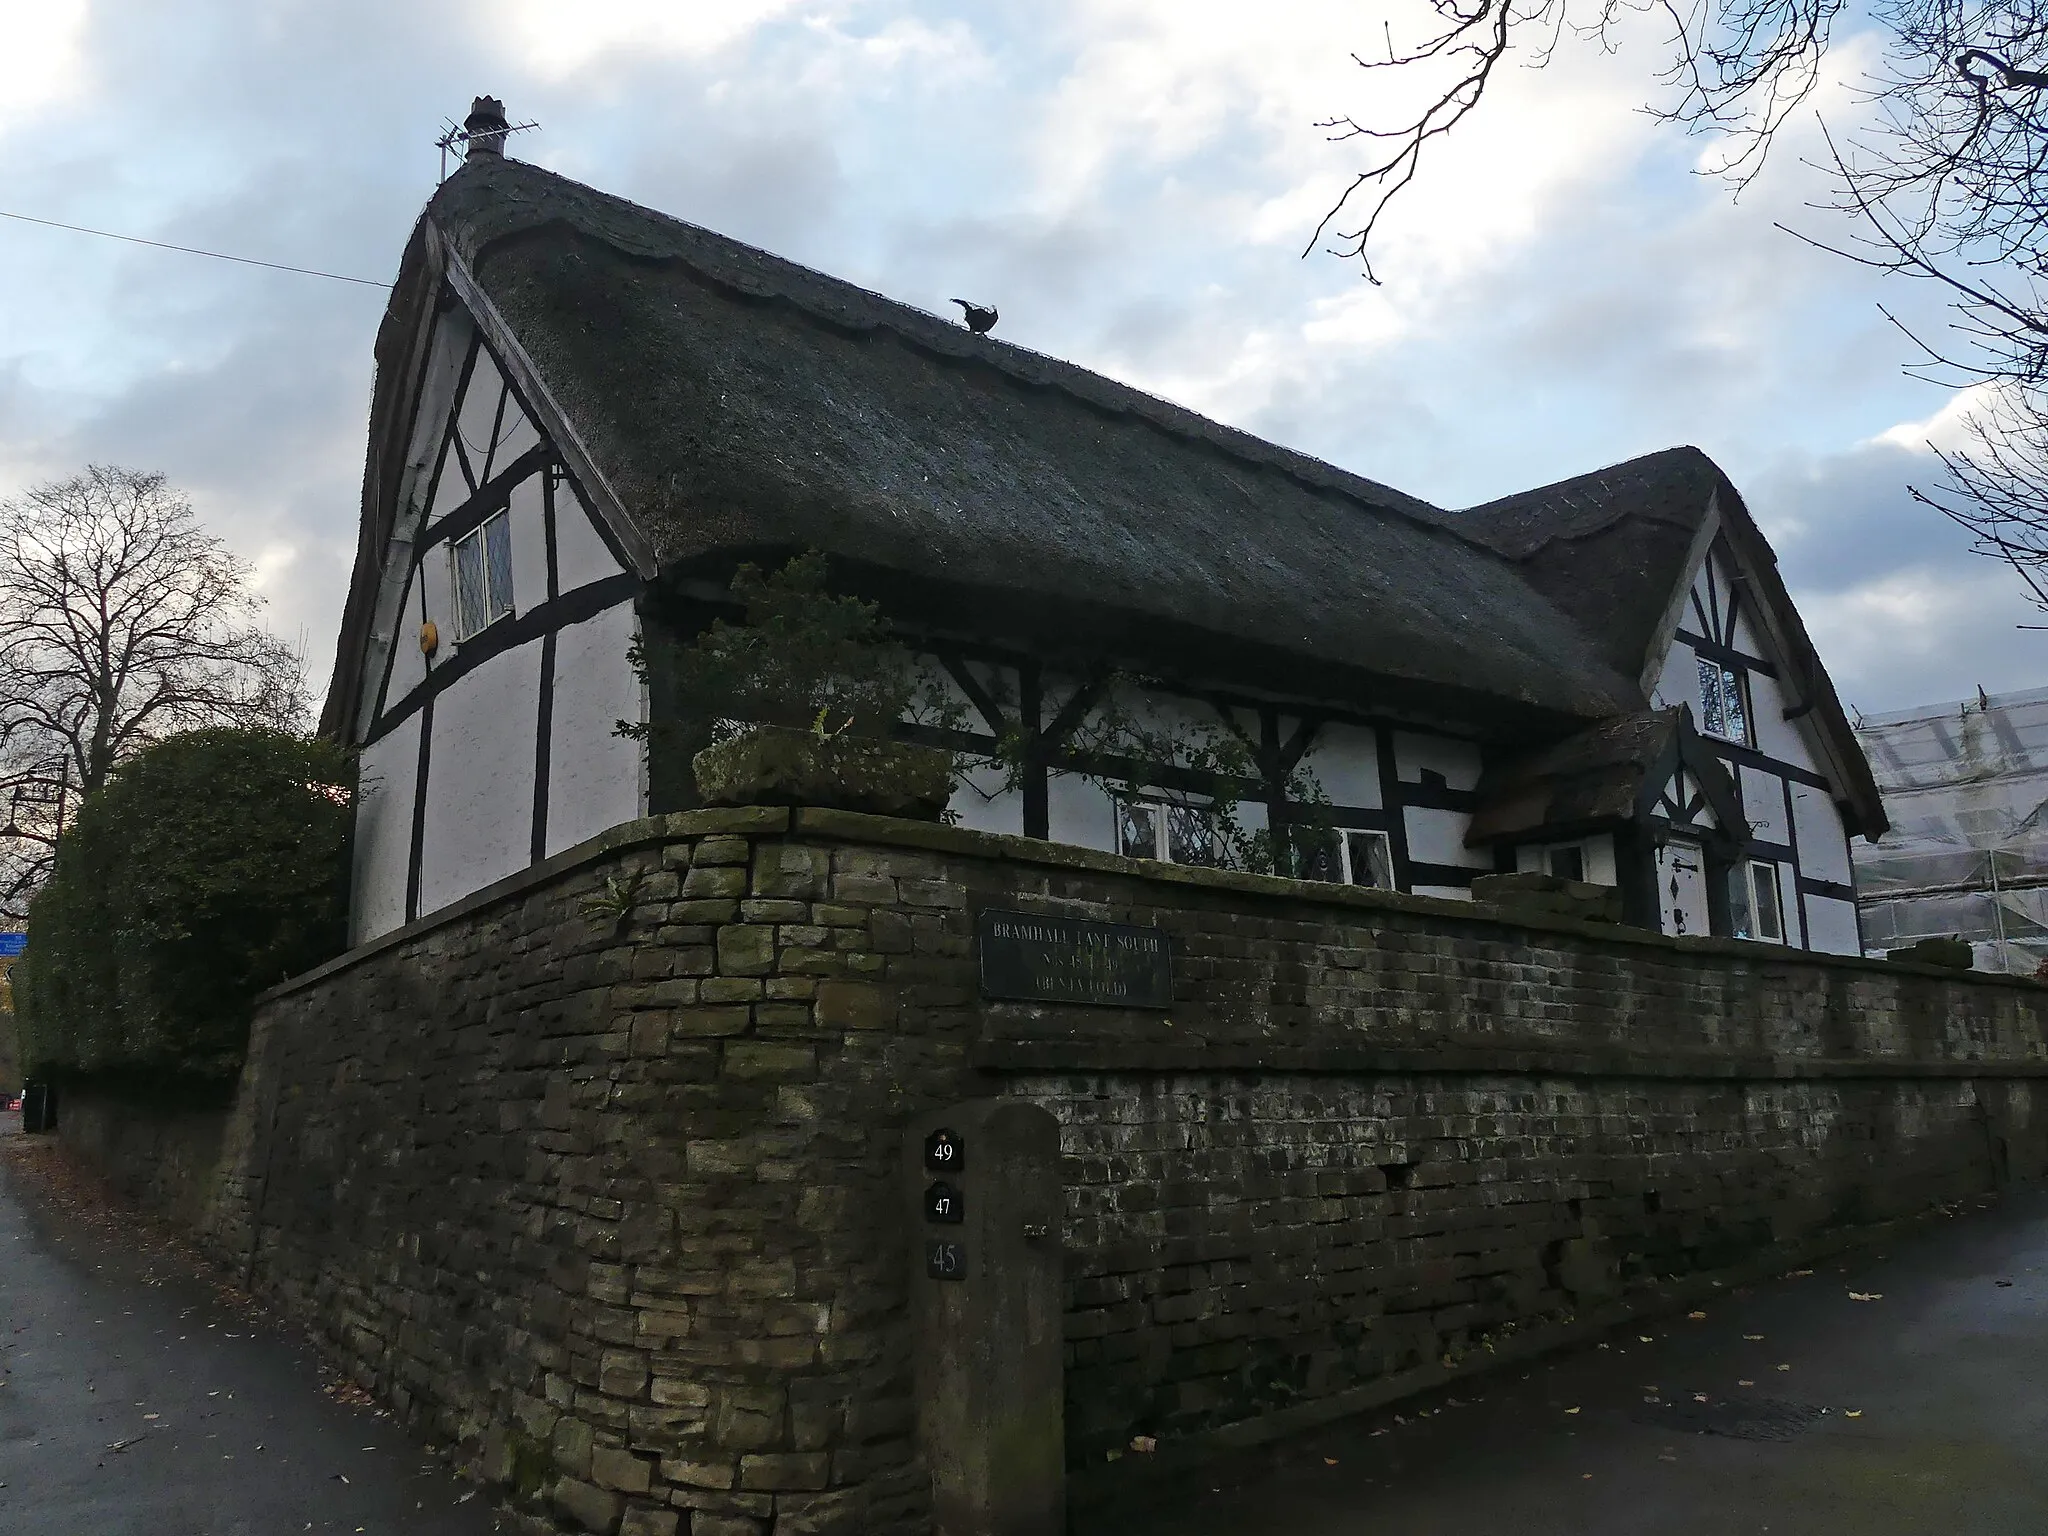 Photo showing: Benja Cottage, Benja Fold: Grade II listed house in Bramhall, Stockport, UK. Wikidata has entry Benja Cottage, Benja Fold (Q26551484) with data related to this item.